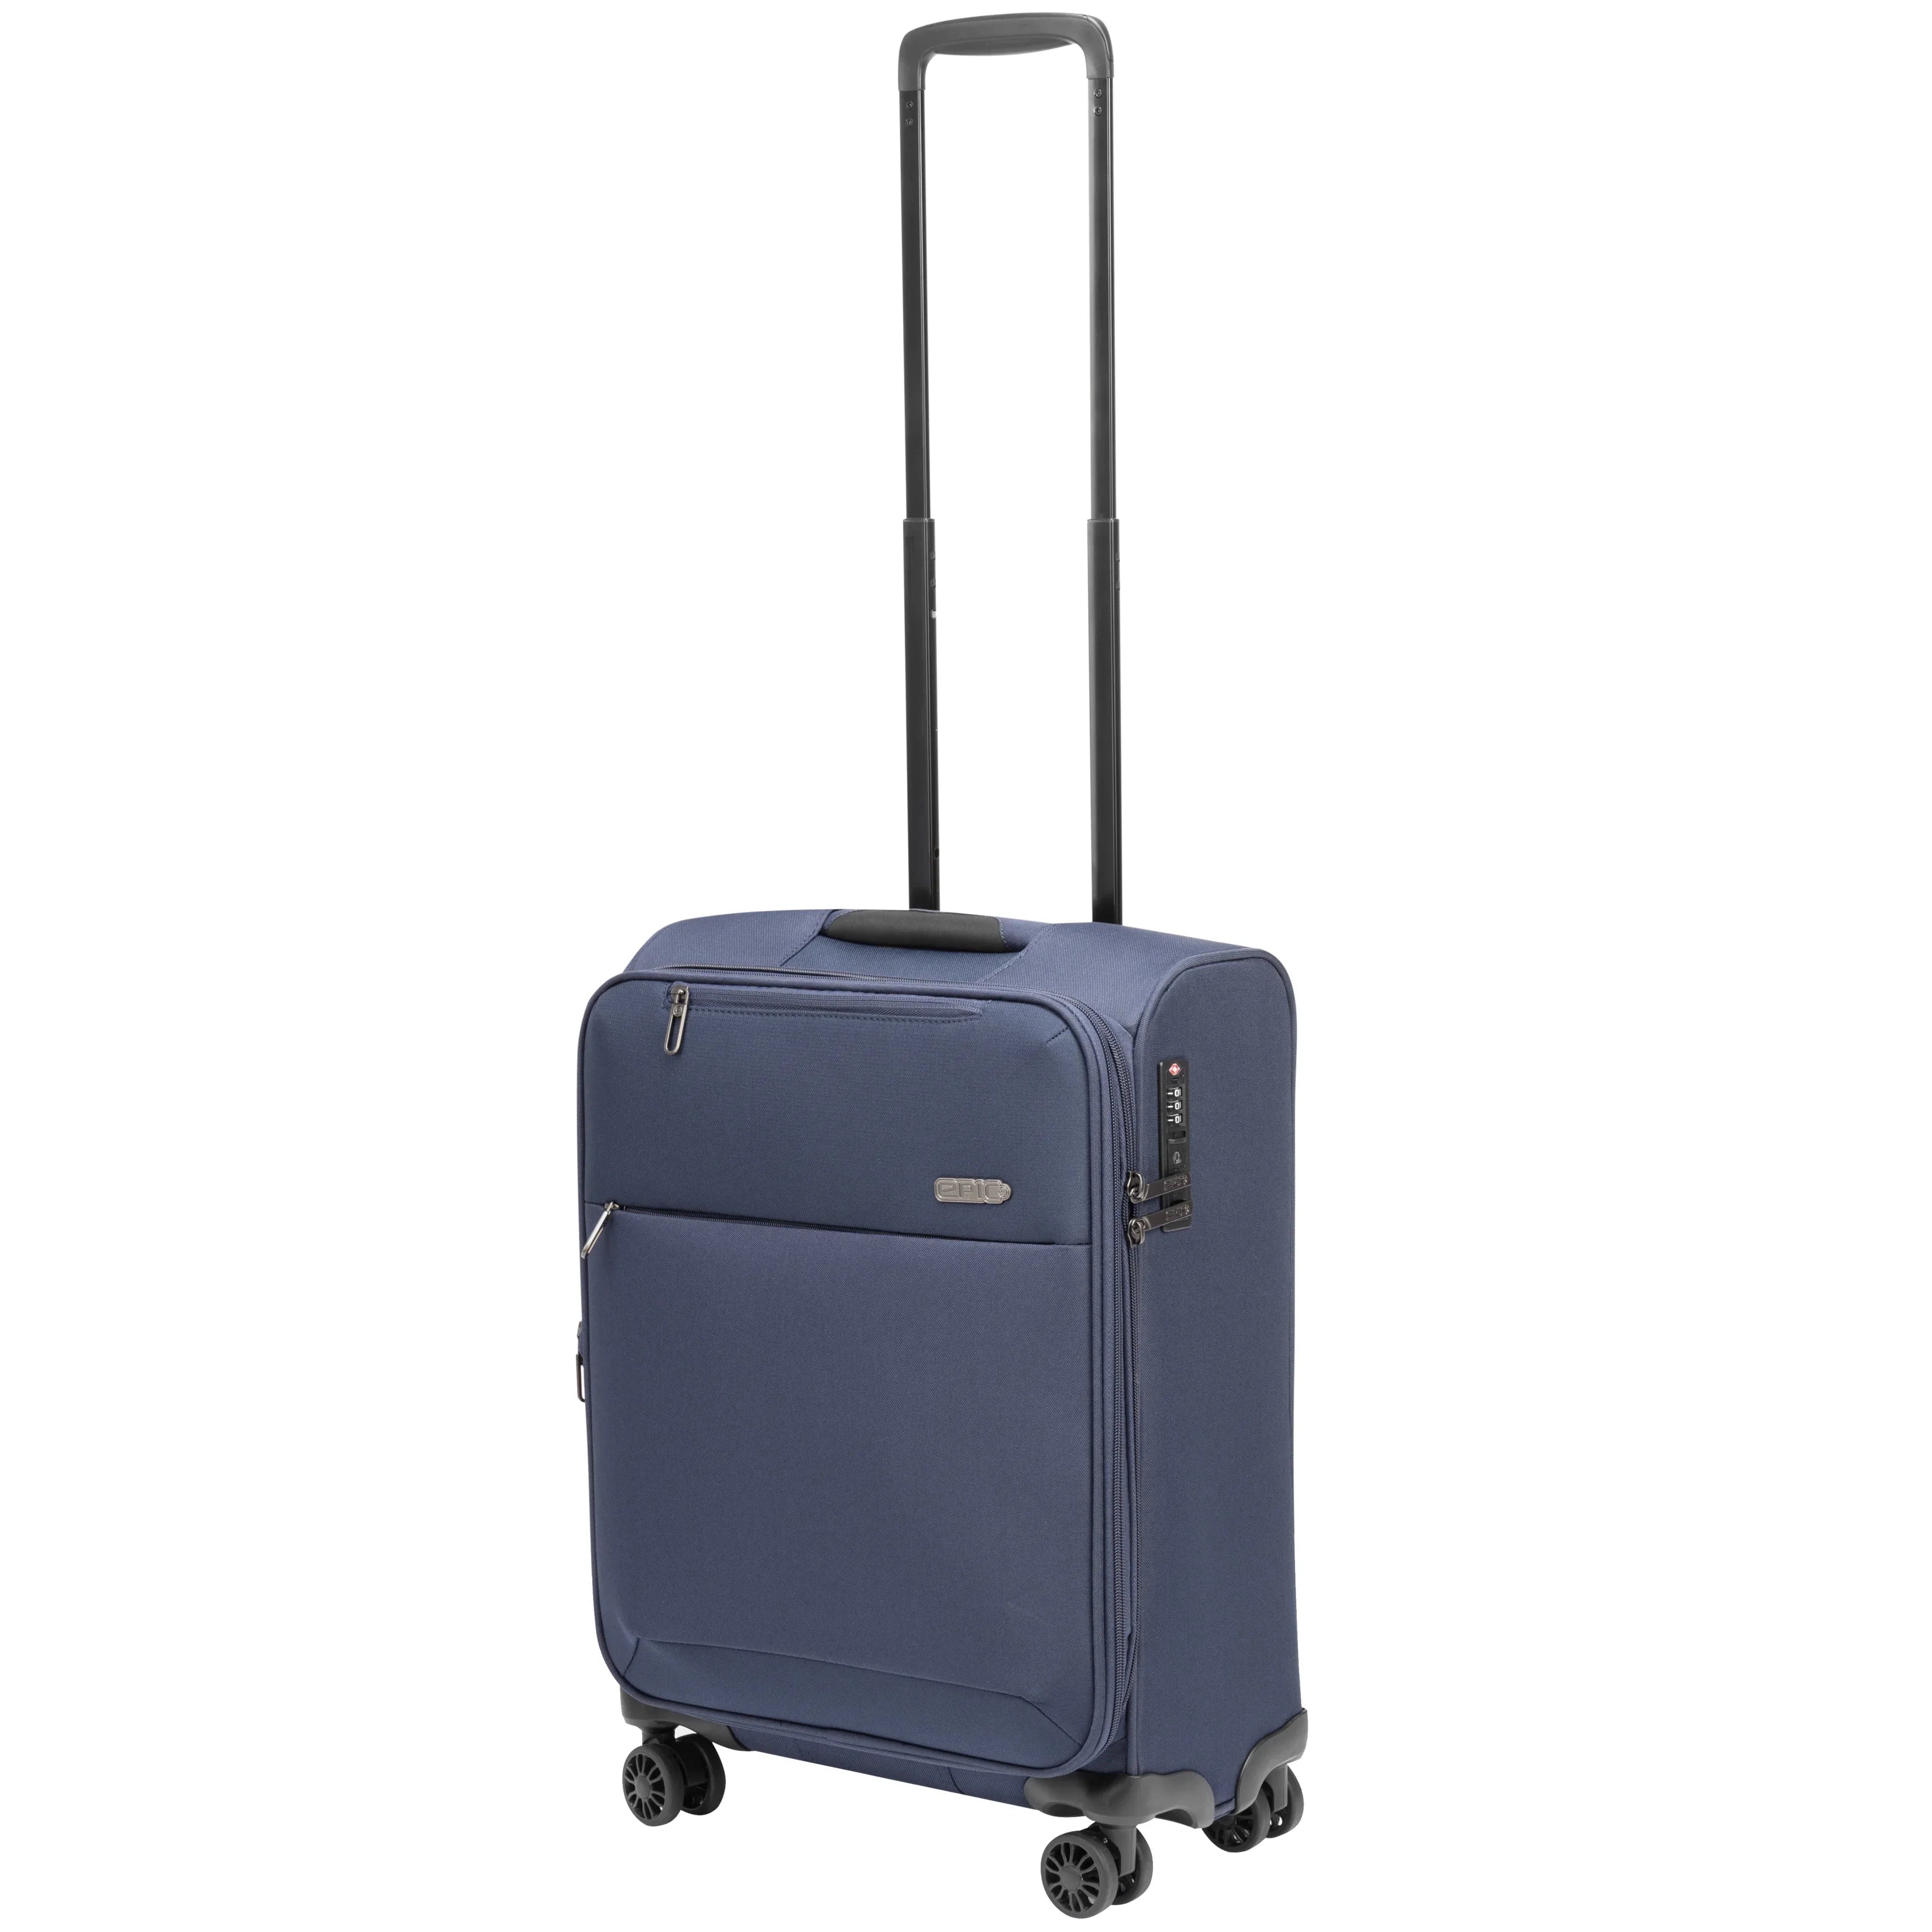 Epic Discovery Neo 4-Rollen Trolley 55 cm - navy blue